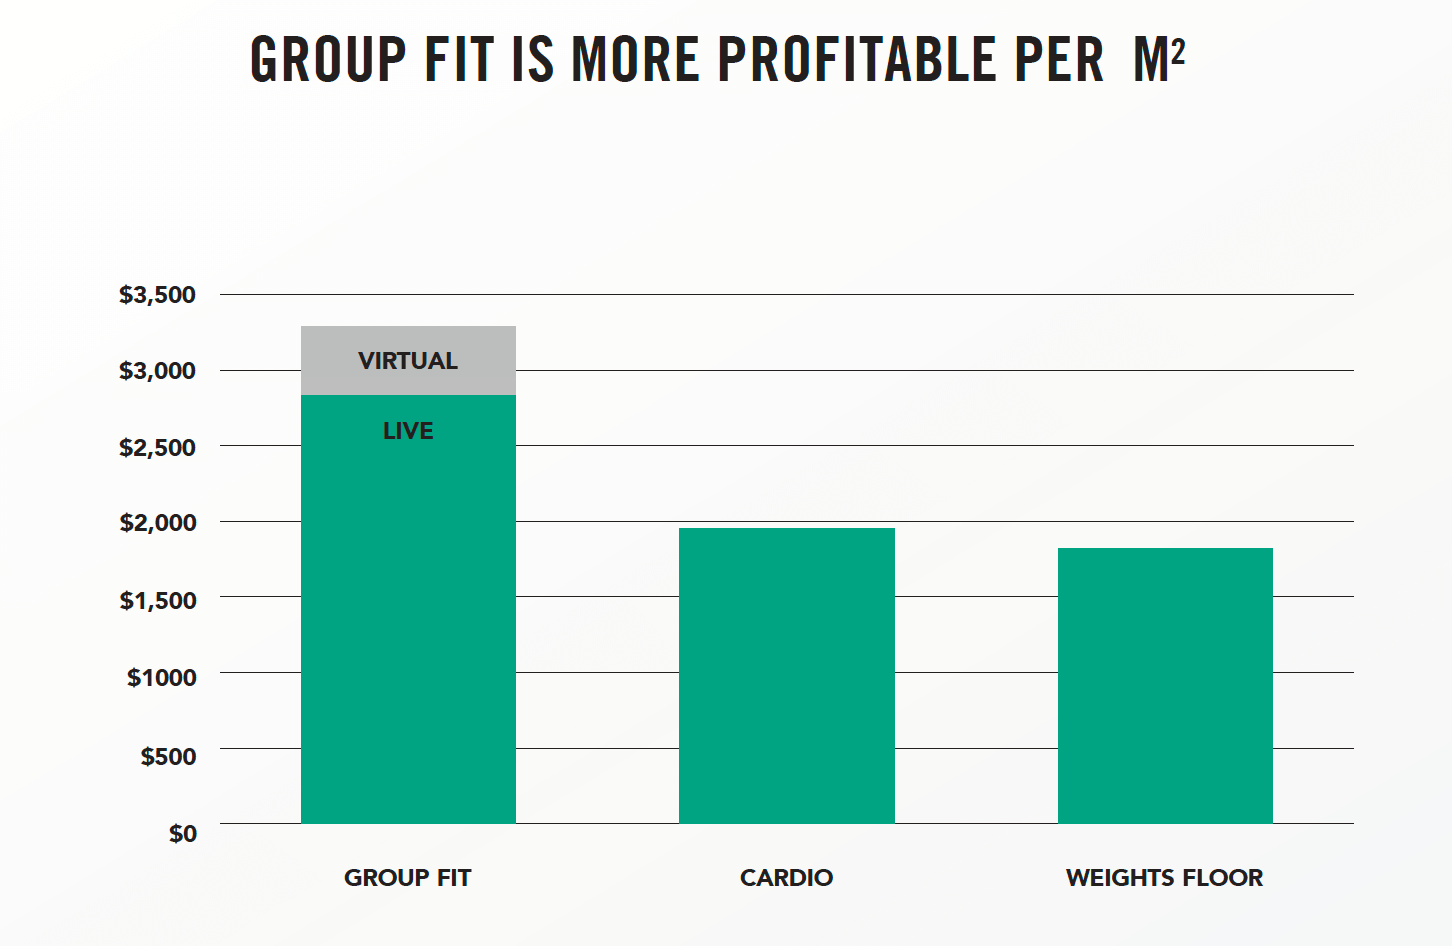 Group Fit is more profitable per m2